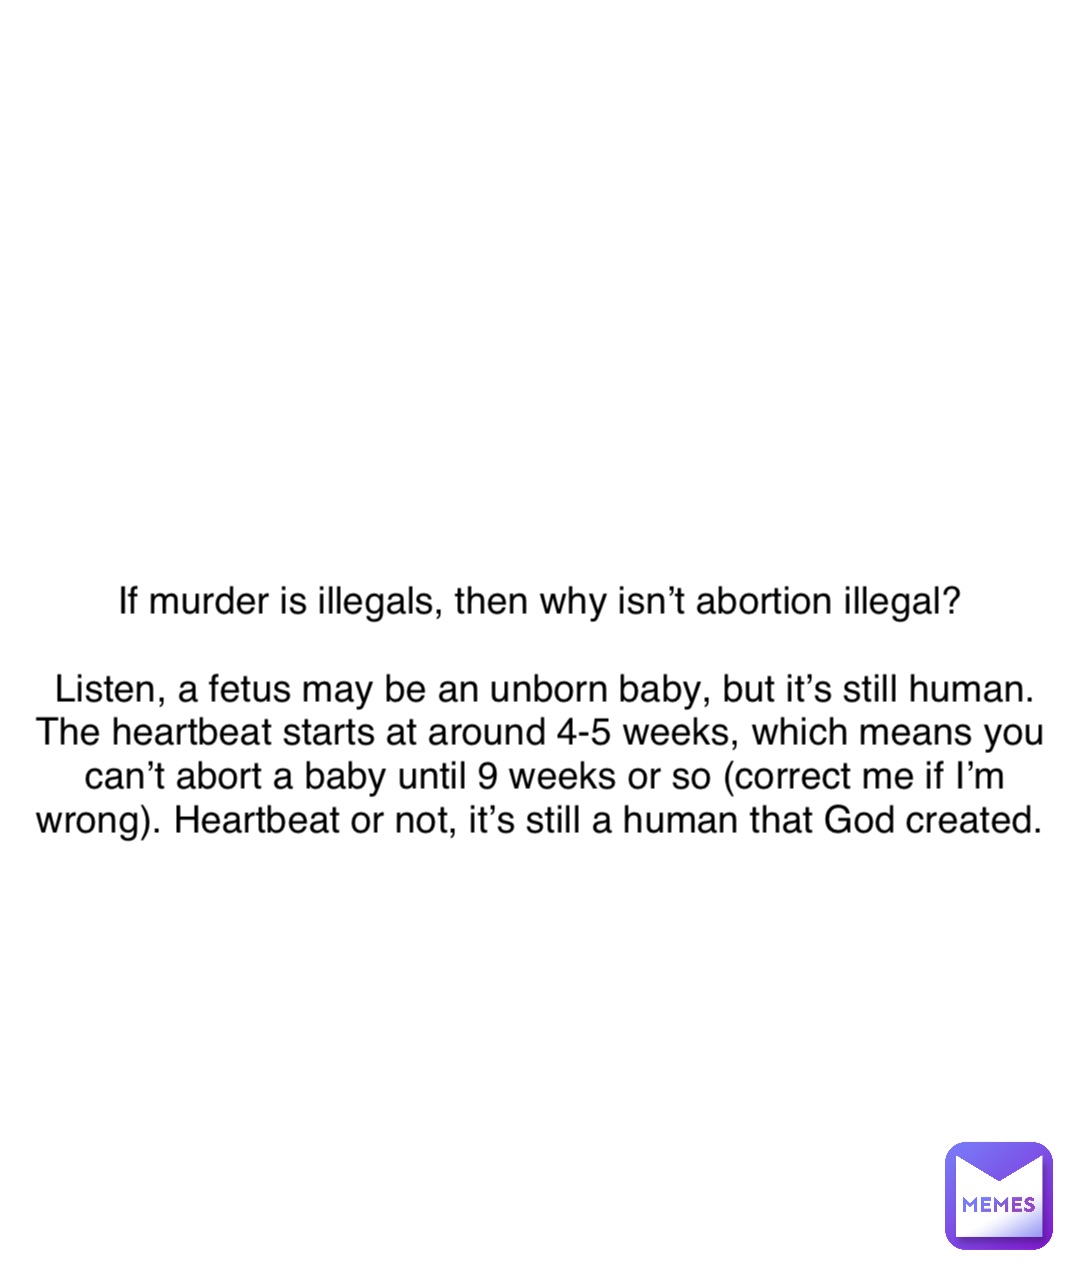 Double tap to edit If murder is illegals, then why isn’t abortion illegal?

Listen, a fetus may be an unborn baby, but it’s still human. 
The heartbeat starts at around 4-5 weeks, which means you can’t abort a baby until 9 weeks or so (correct me if I’m wrong). Heartbeat or not, it’s still a human that God created.